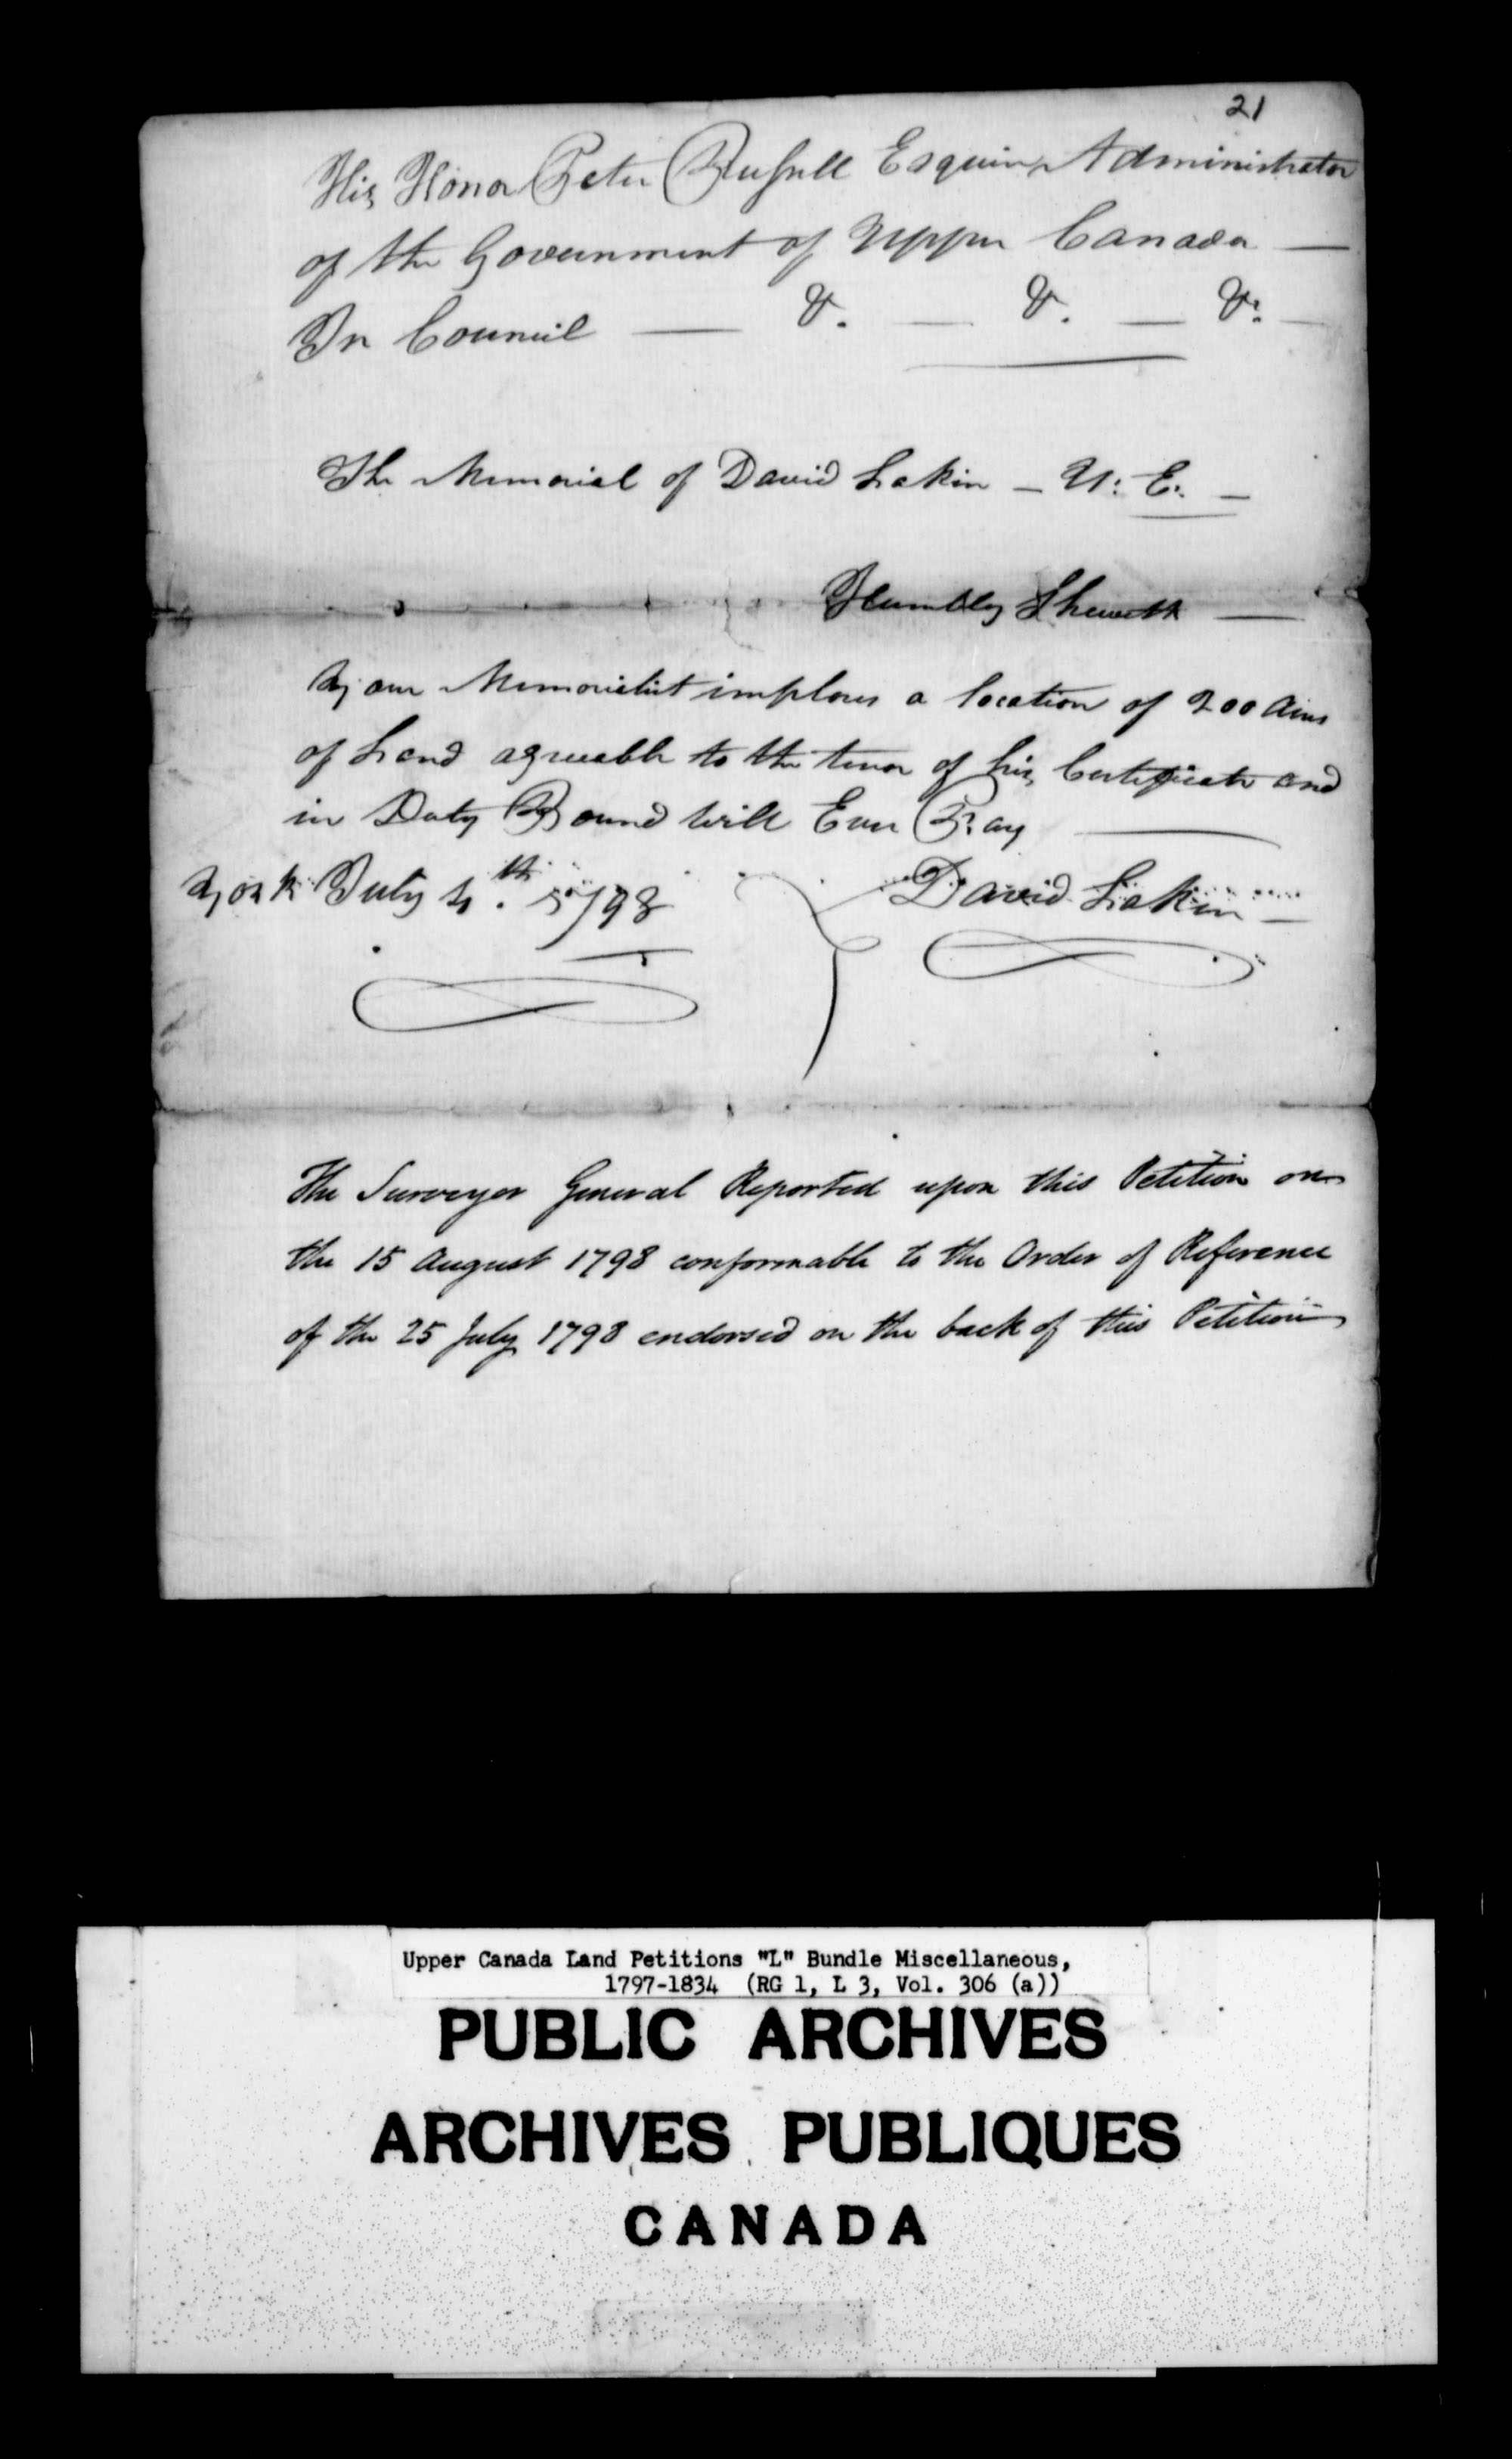 Title: Upper Canada Land Petitions (1763-1865) - Mikan Number: 205131 - Microform: c-2138